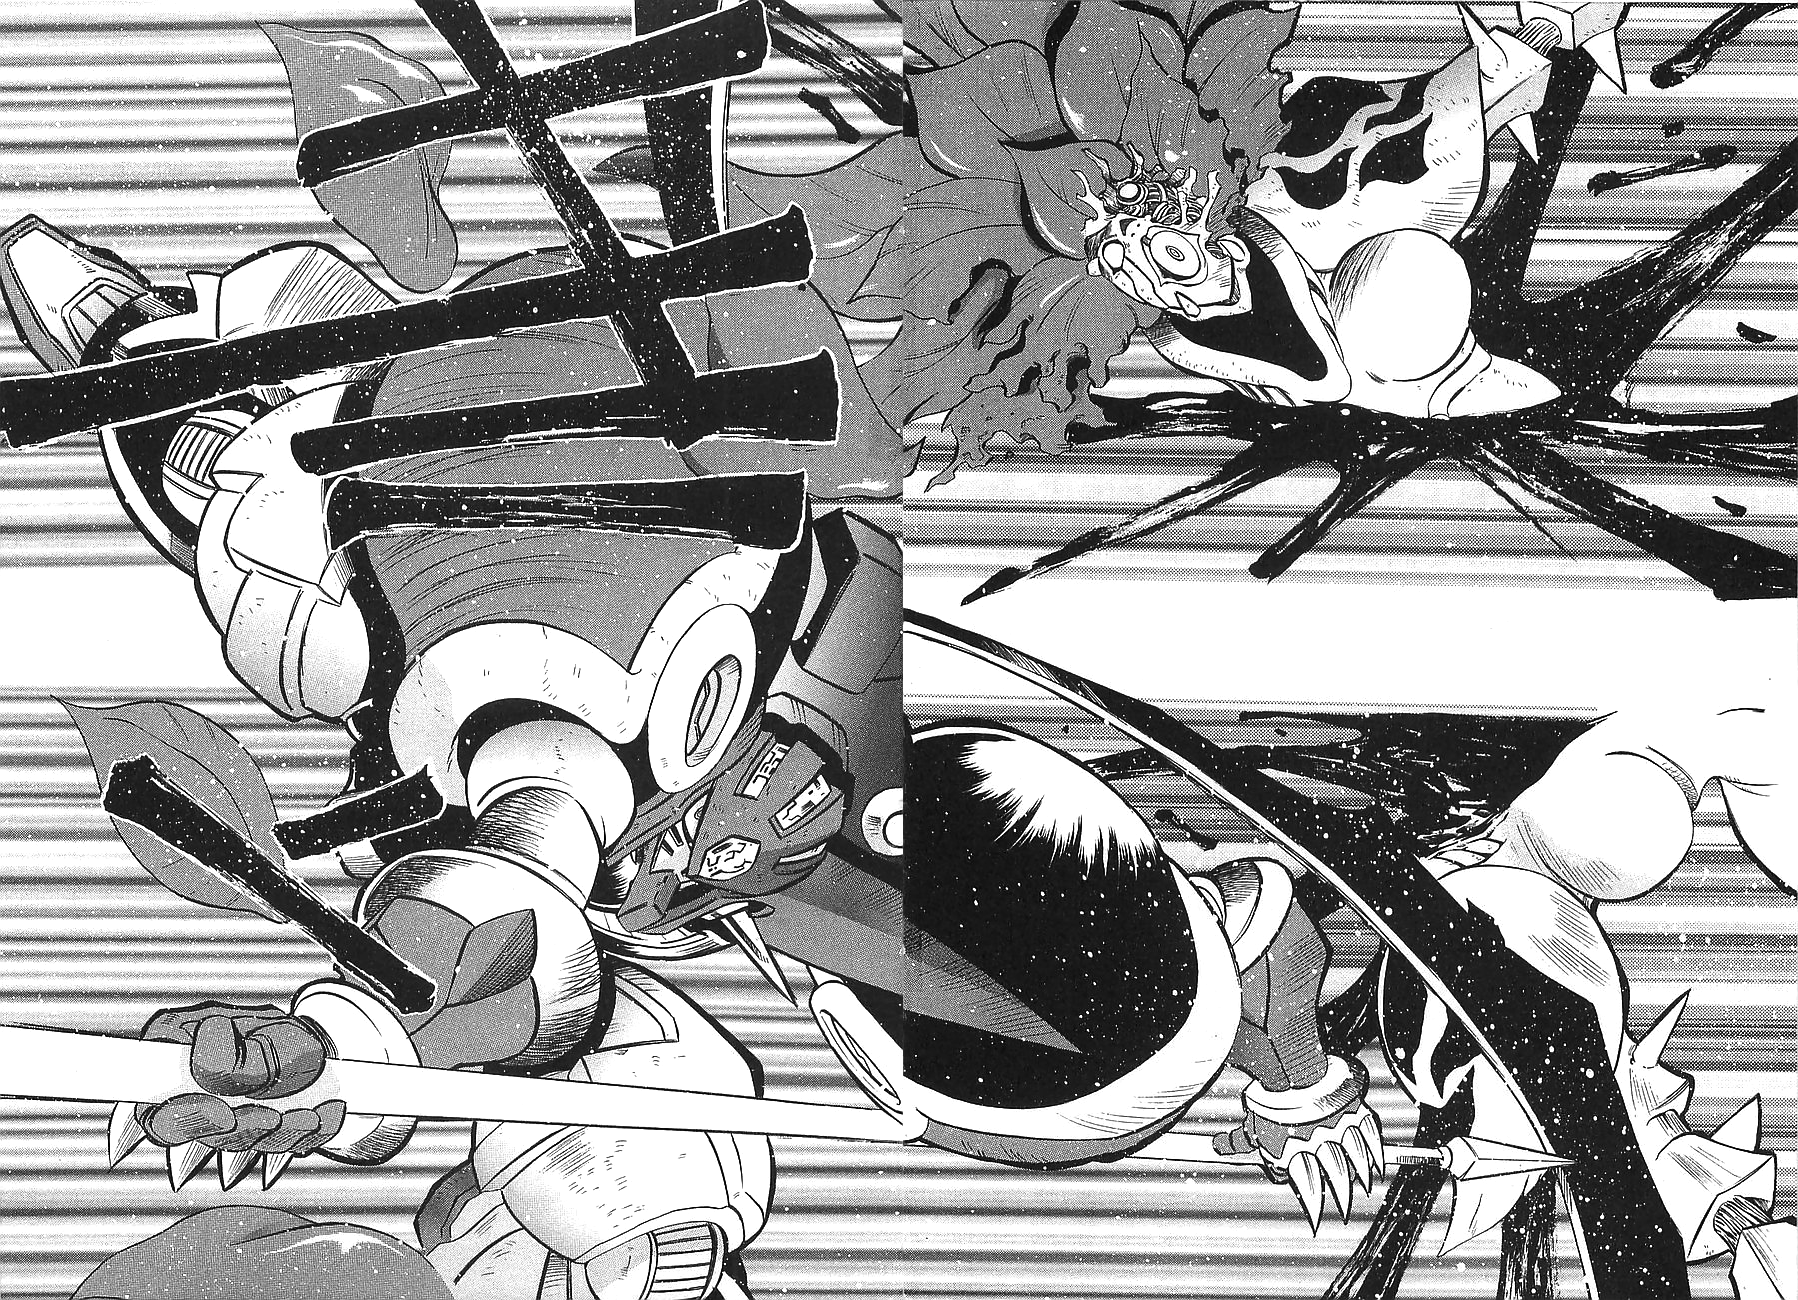 Getter Robo Hien - The Earth Suicide Vol.2 Chapter 9: The Poisonous Rose Dancing in Space